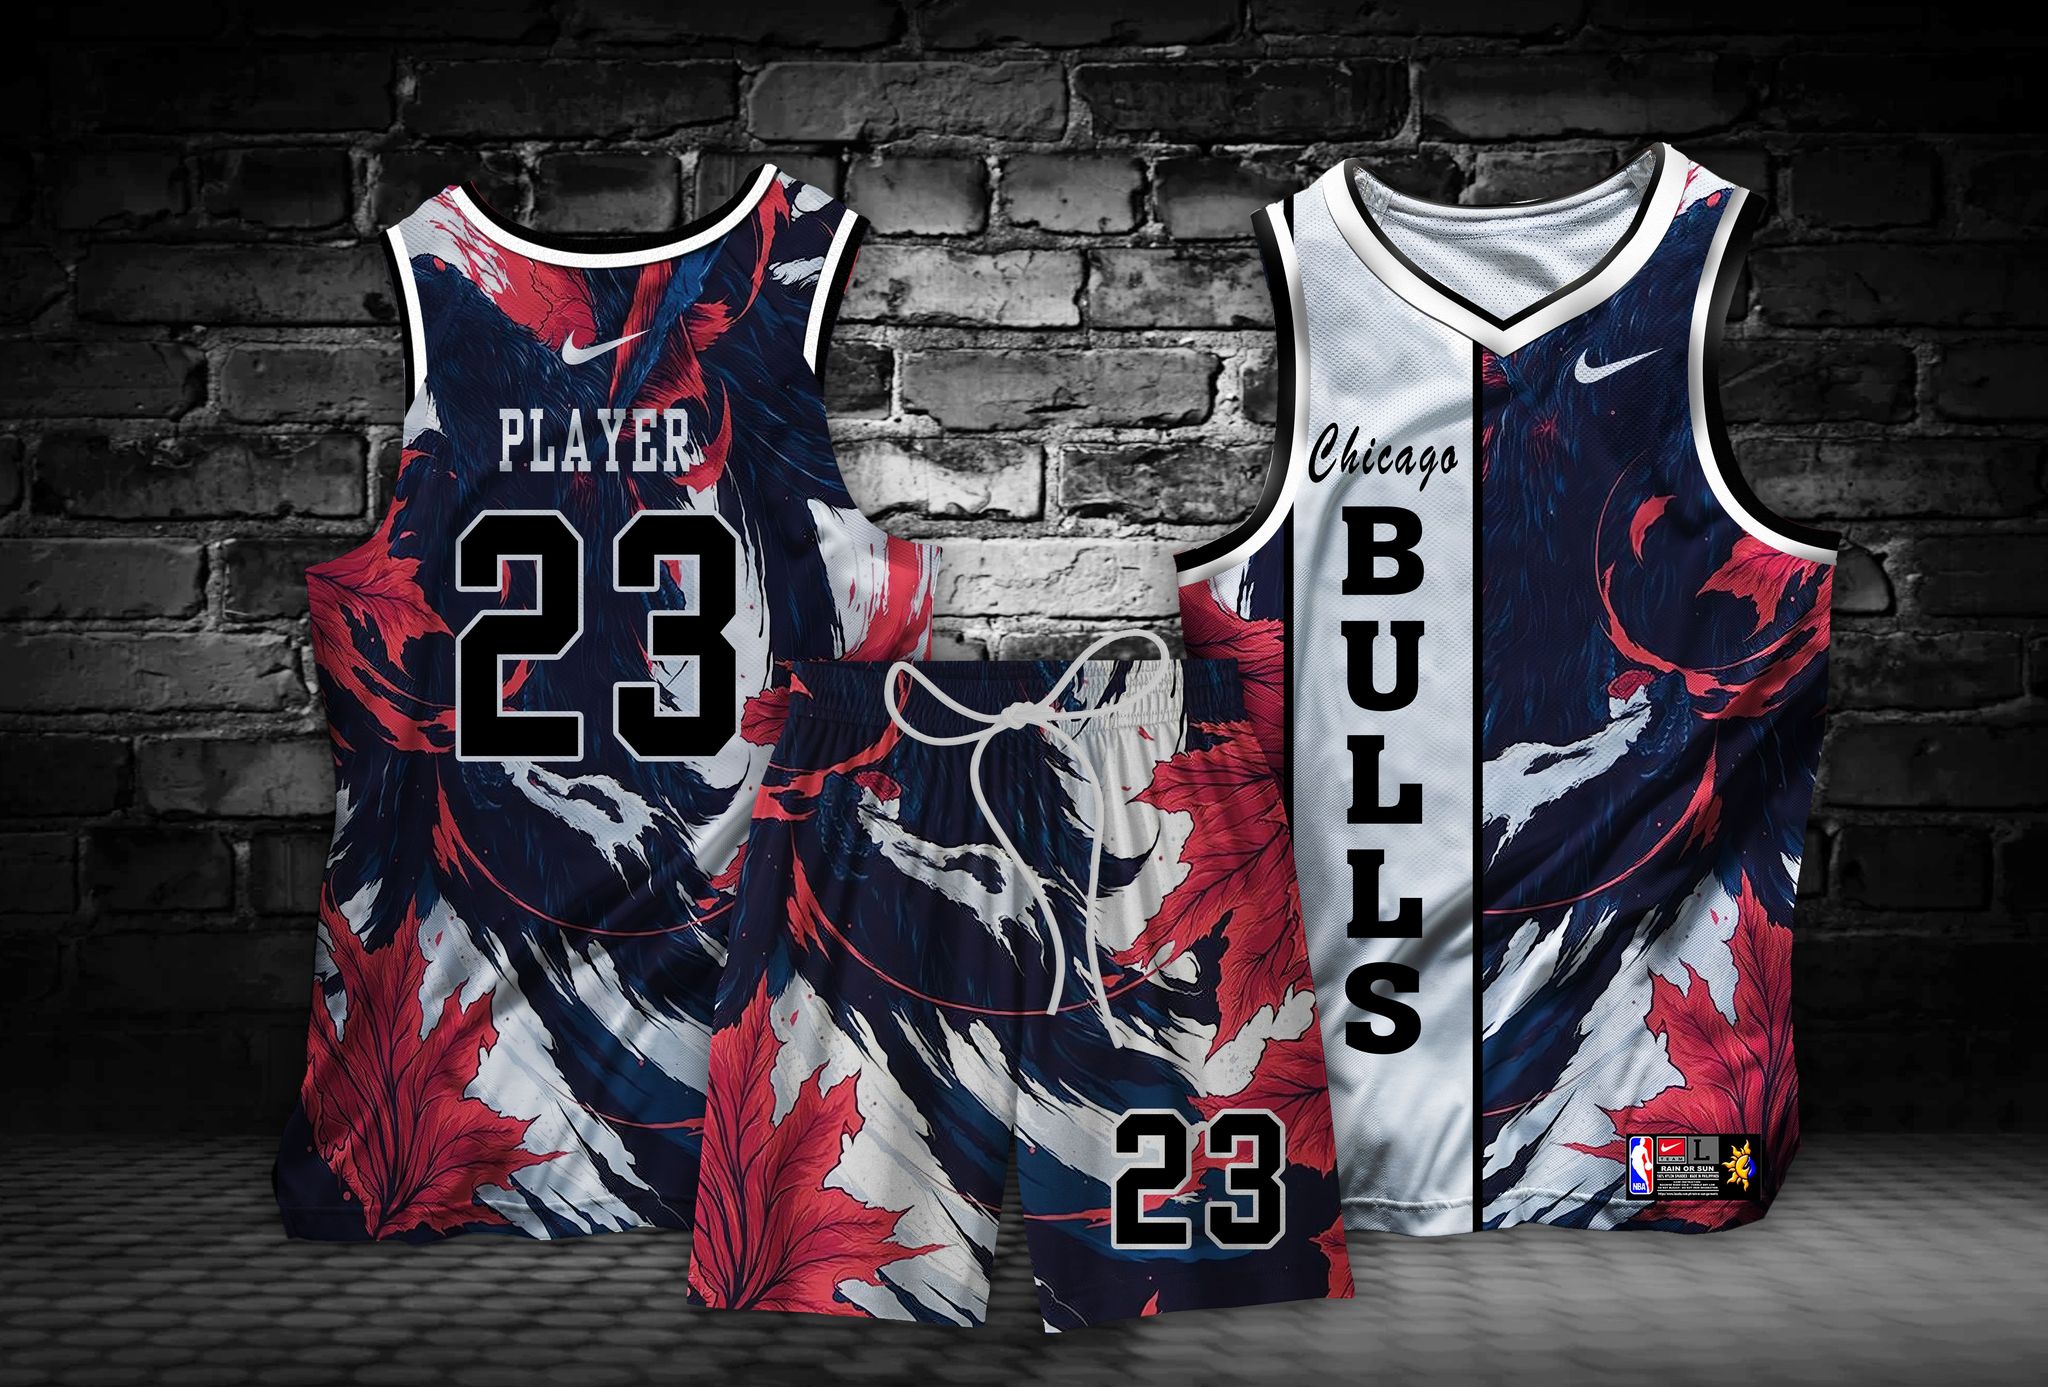 BASKETBALL CHICAGO JERSEY FREE CUSTOMIZE OF NAME AND NUMBER full sublimation  high quality fabrics/ trending jersey